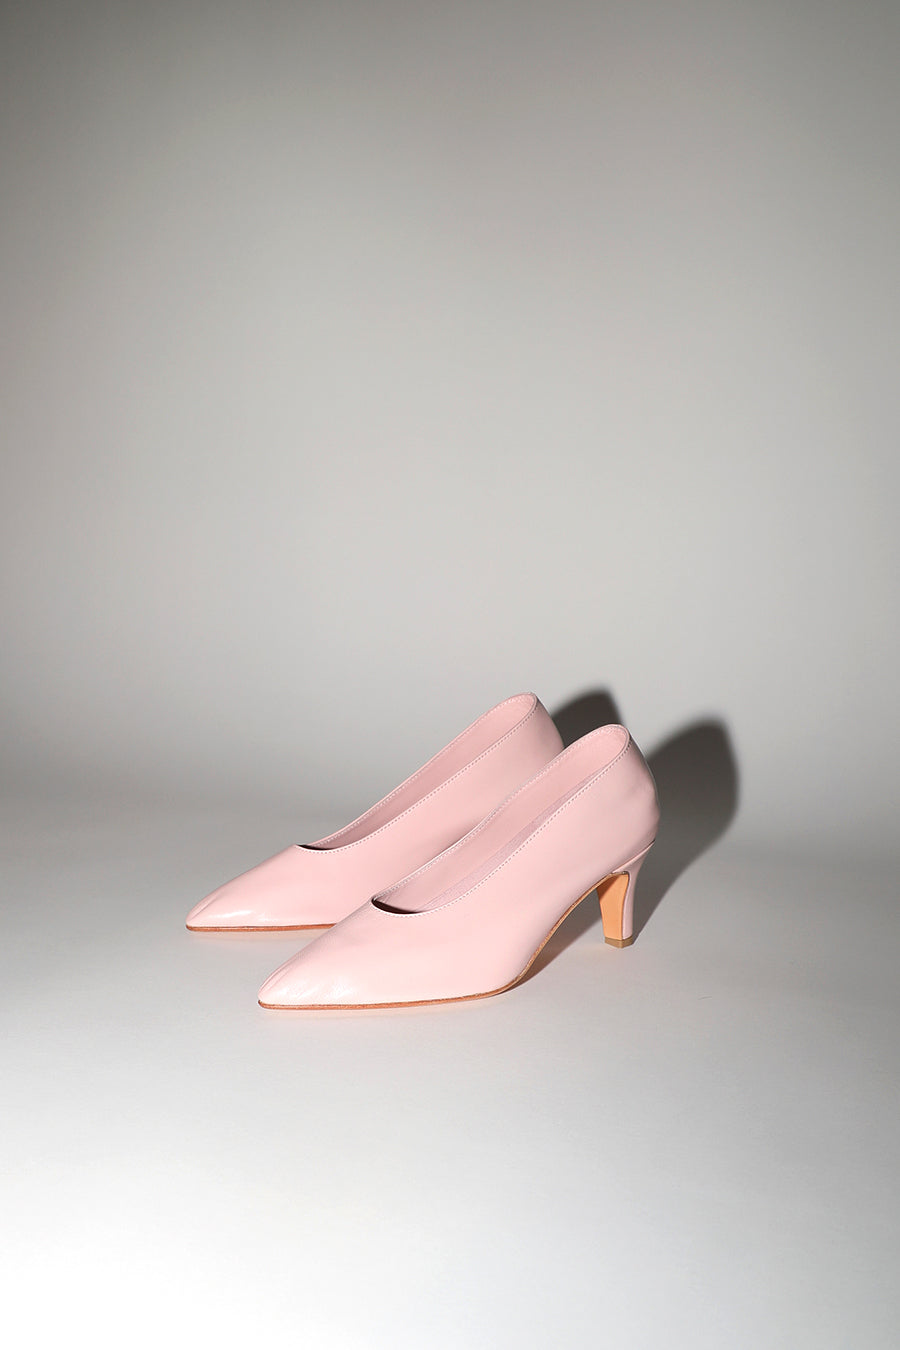 Martiniano Party Pump in Baby Pink